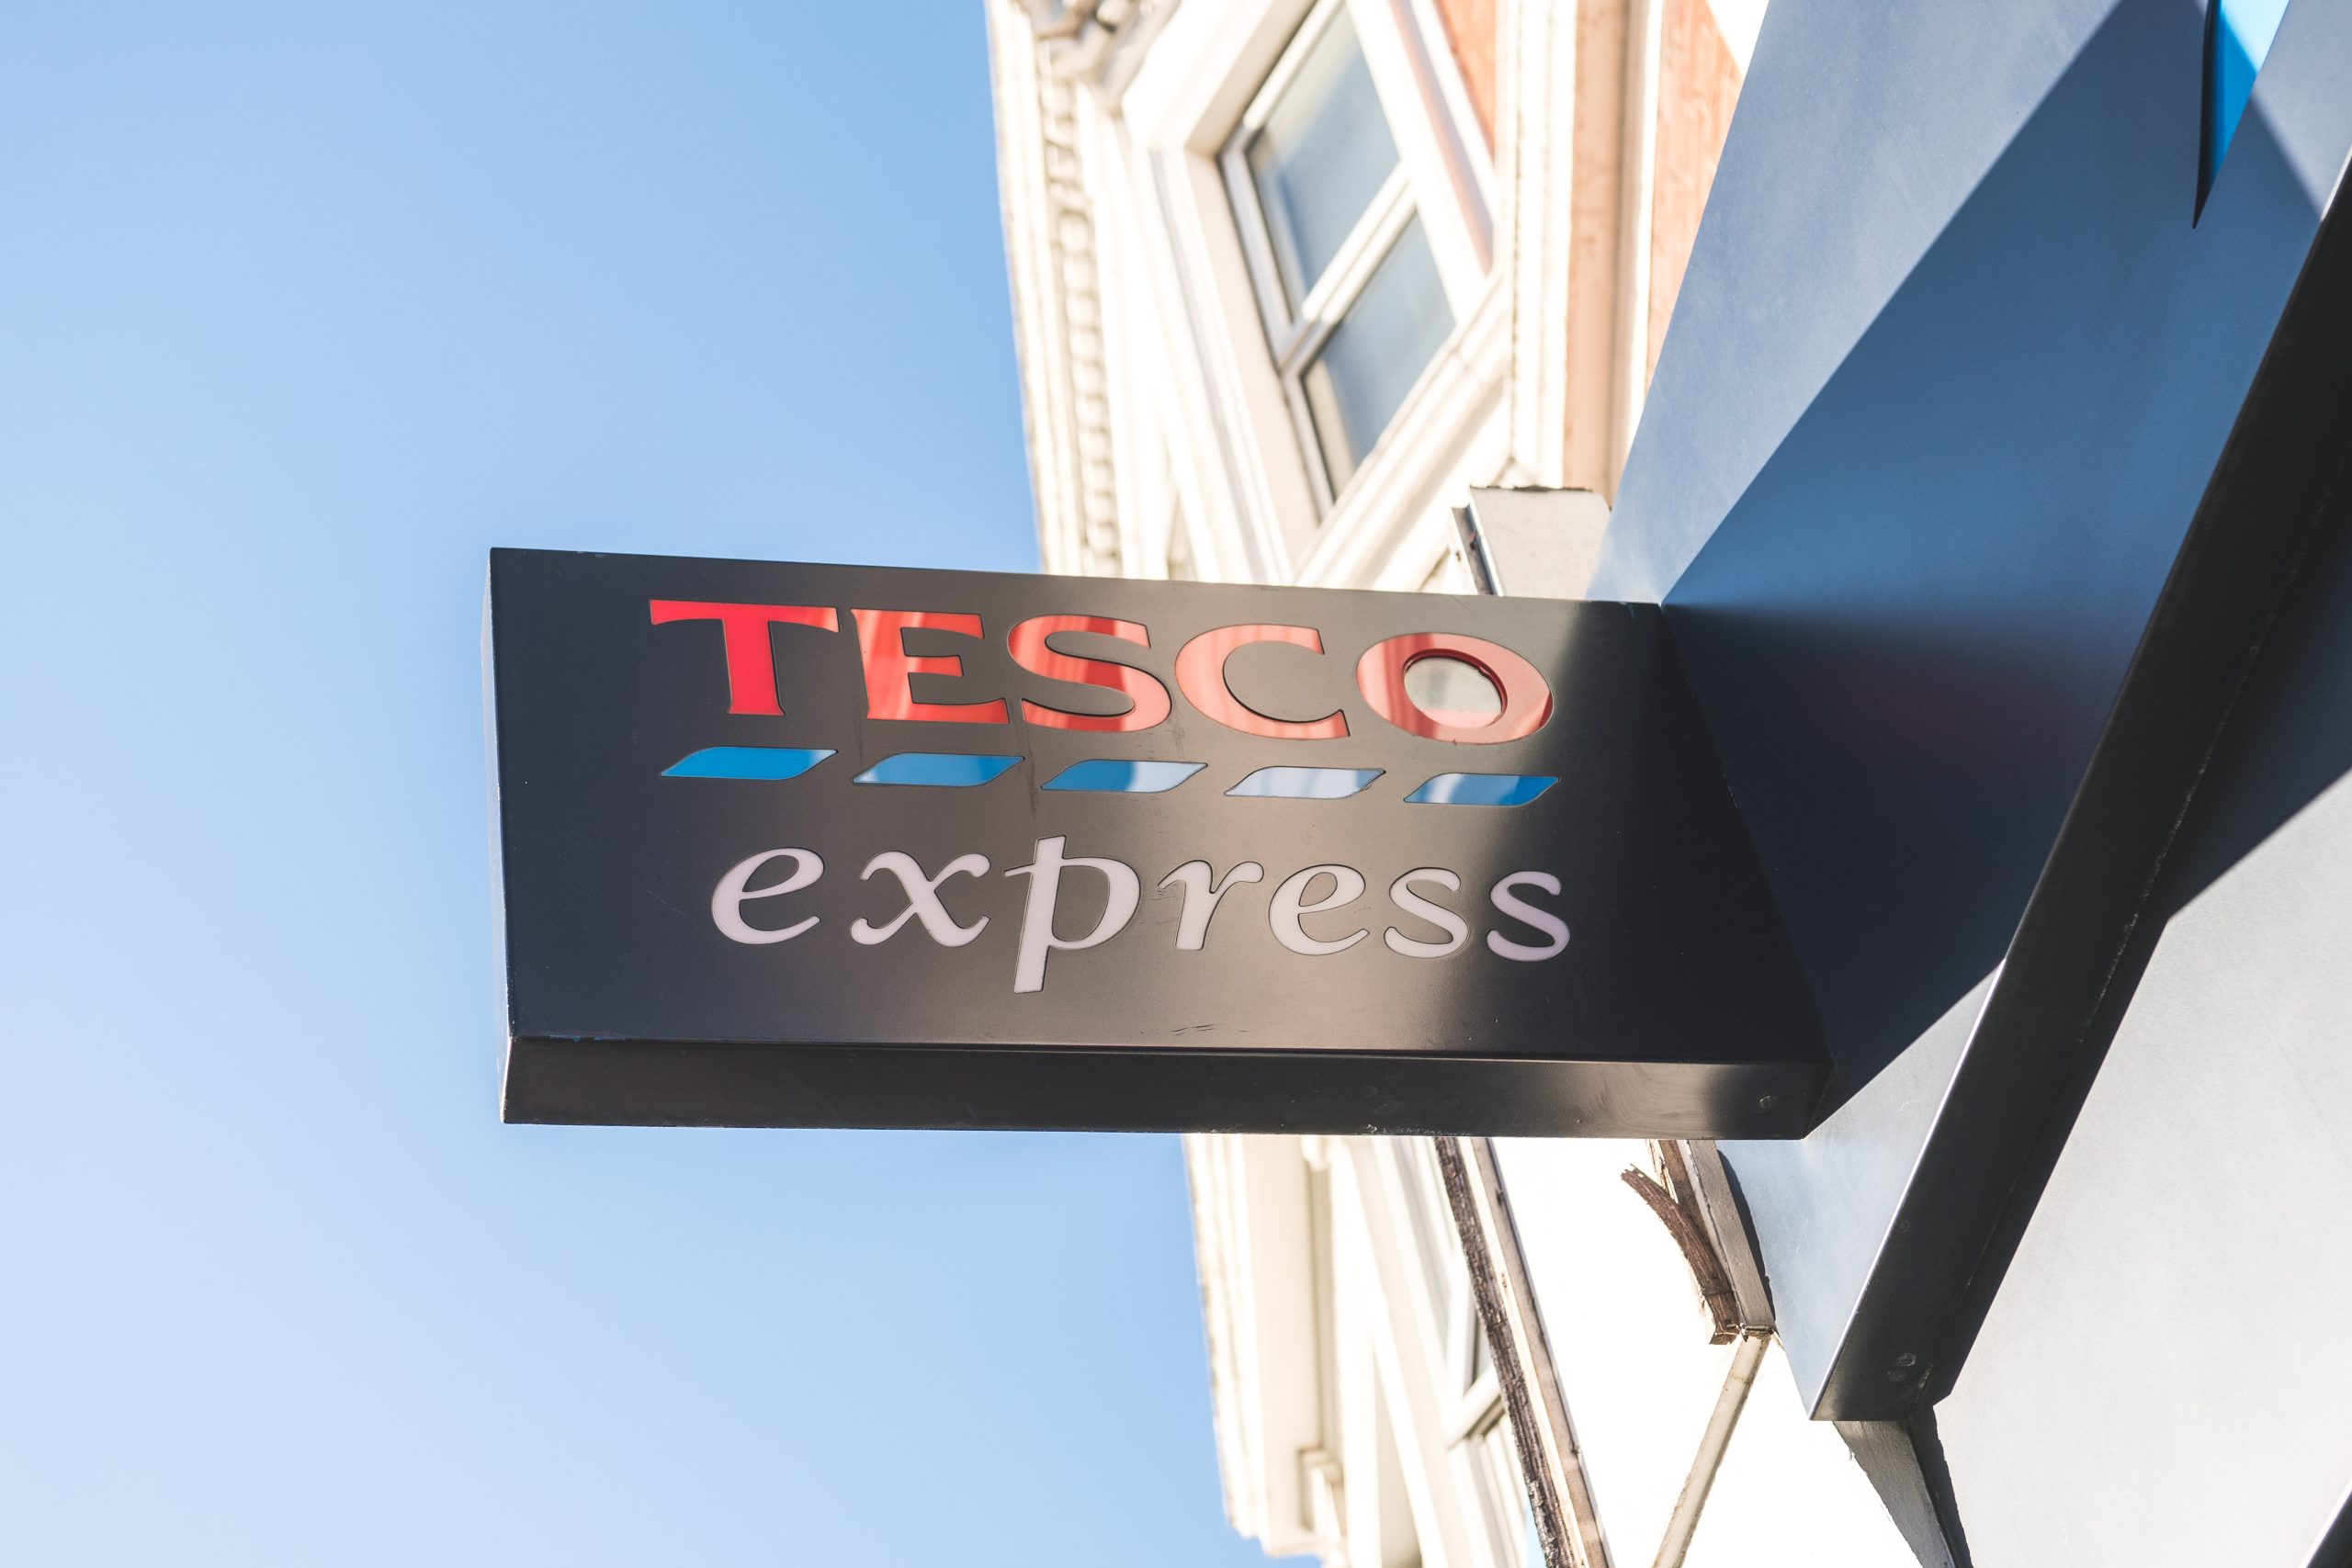 Tesco to invest in its convenience stores – Tesco Express across Ireland